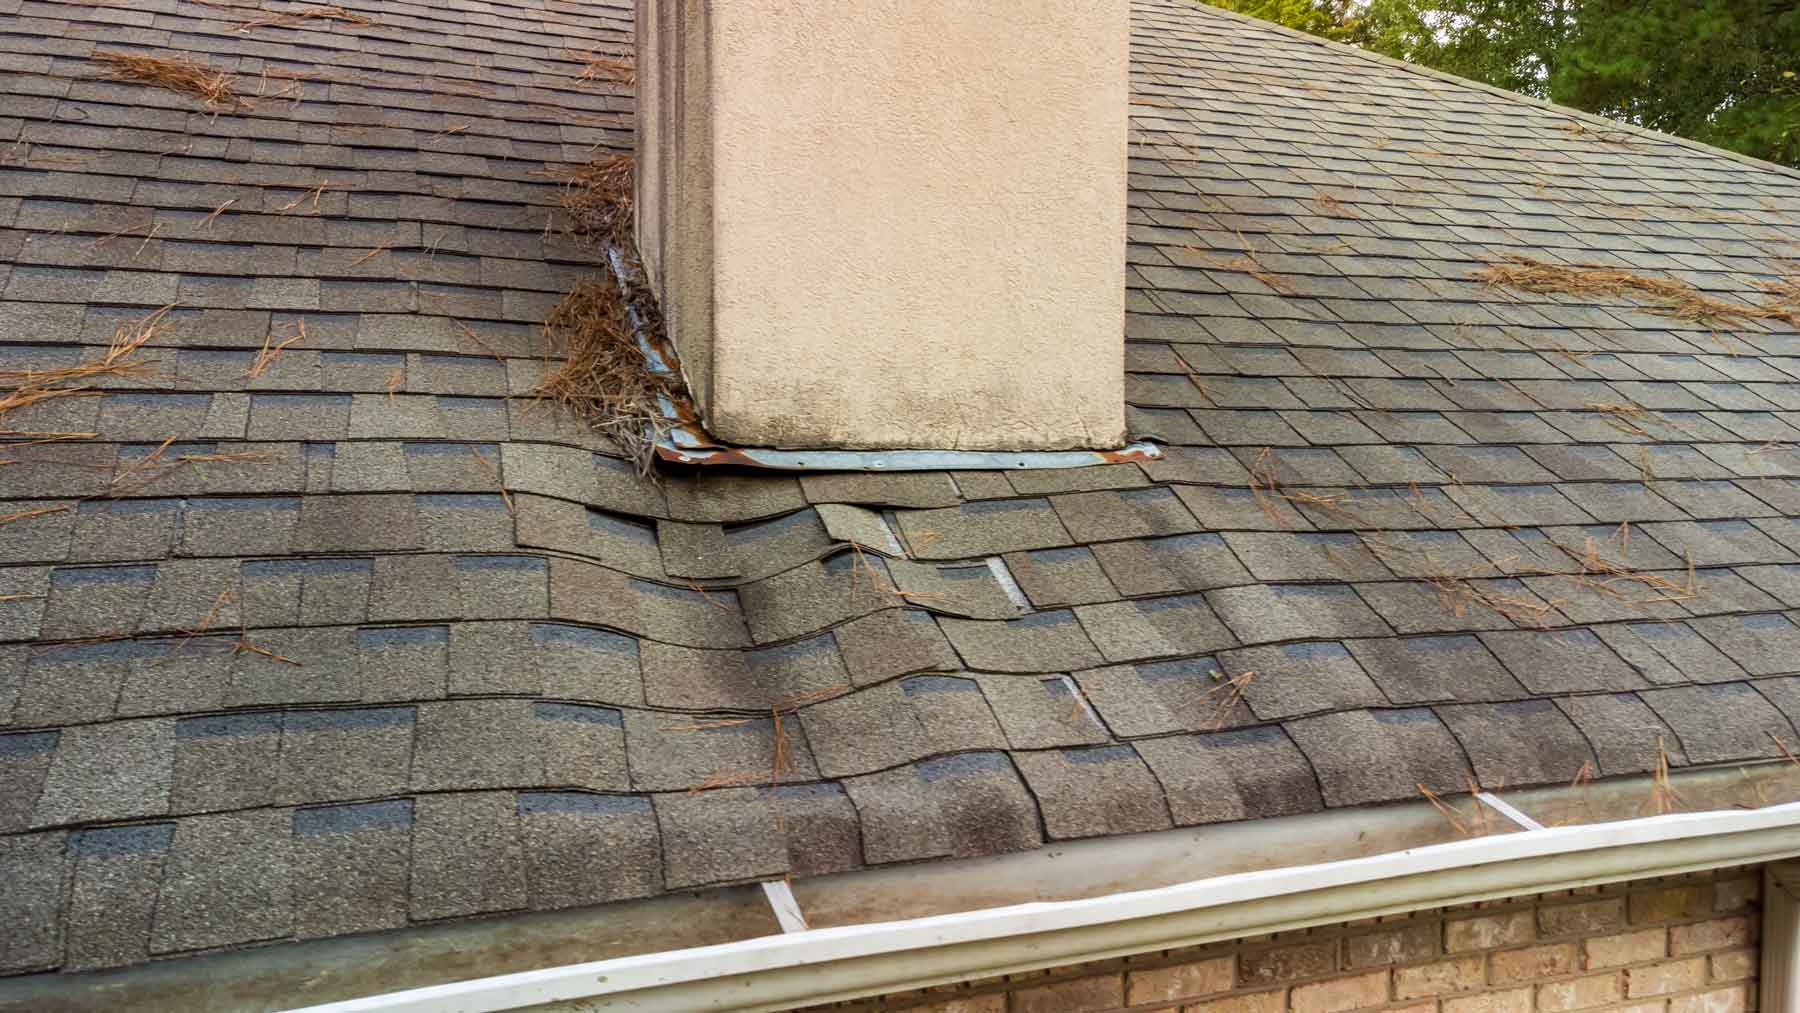 Roof with overly-saturated and damaged asphalt shingles around the chimney.